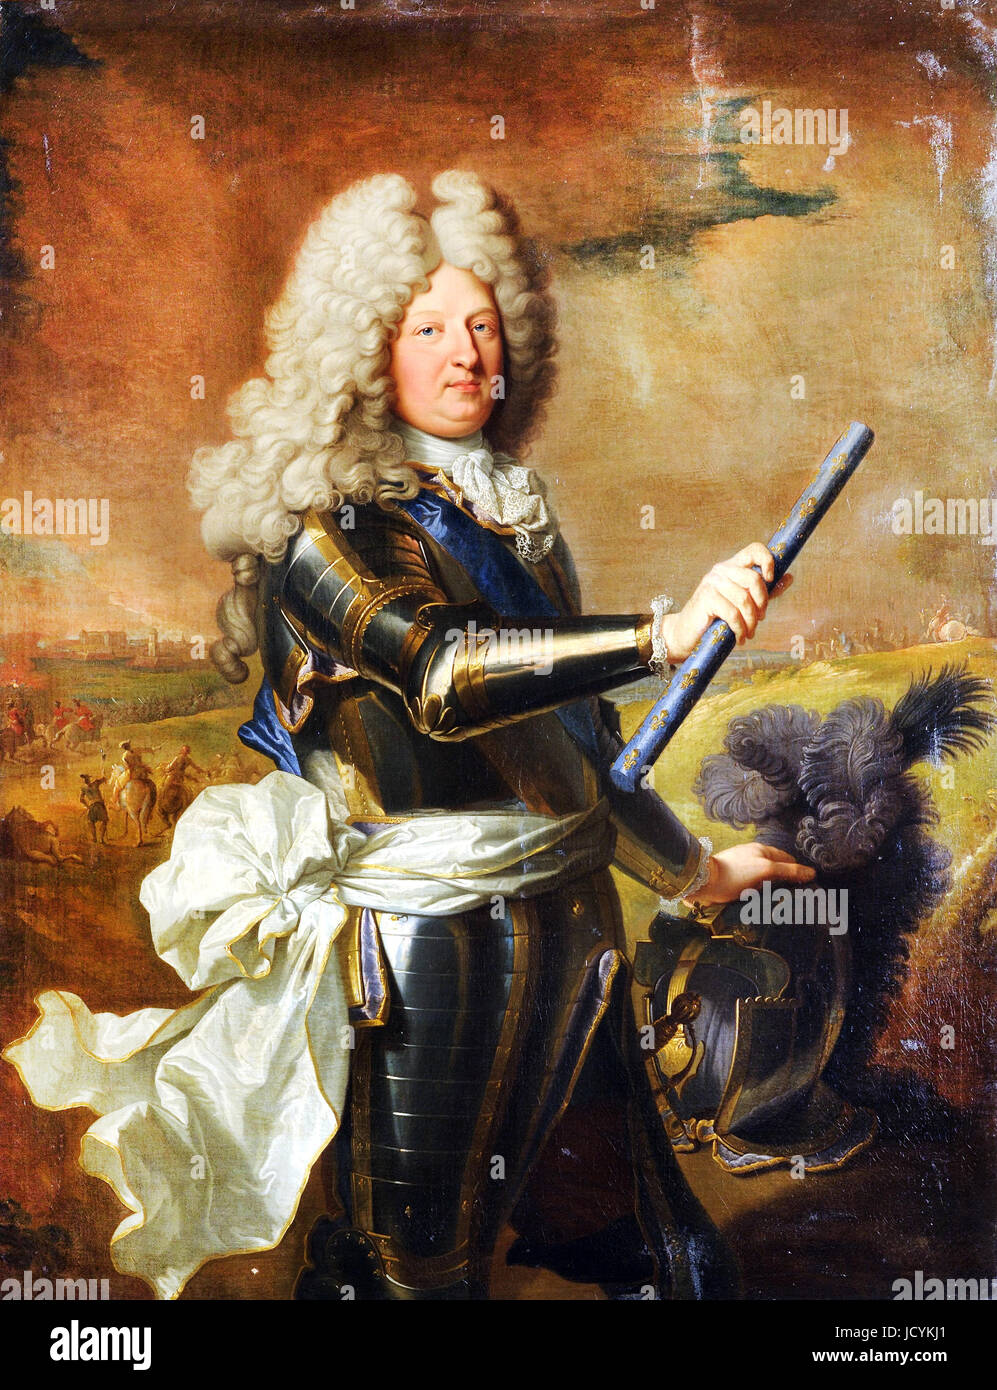 Hyacinthe Rigaud, Louis de France, Dauphin (1661-1711), known as the Grand Dauphin. 1688 Oil on canvas. Palace of Versailles, France. Stock Photo